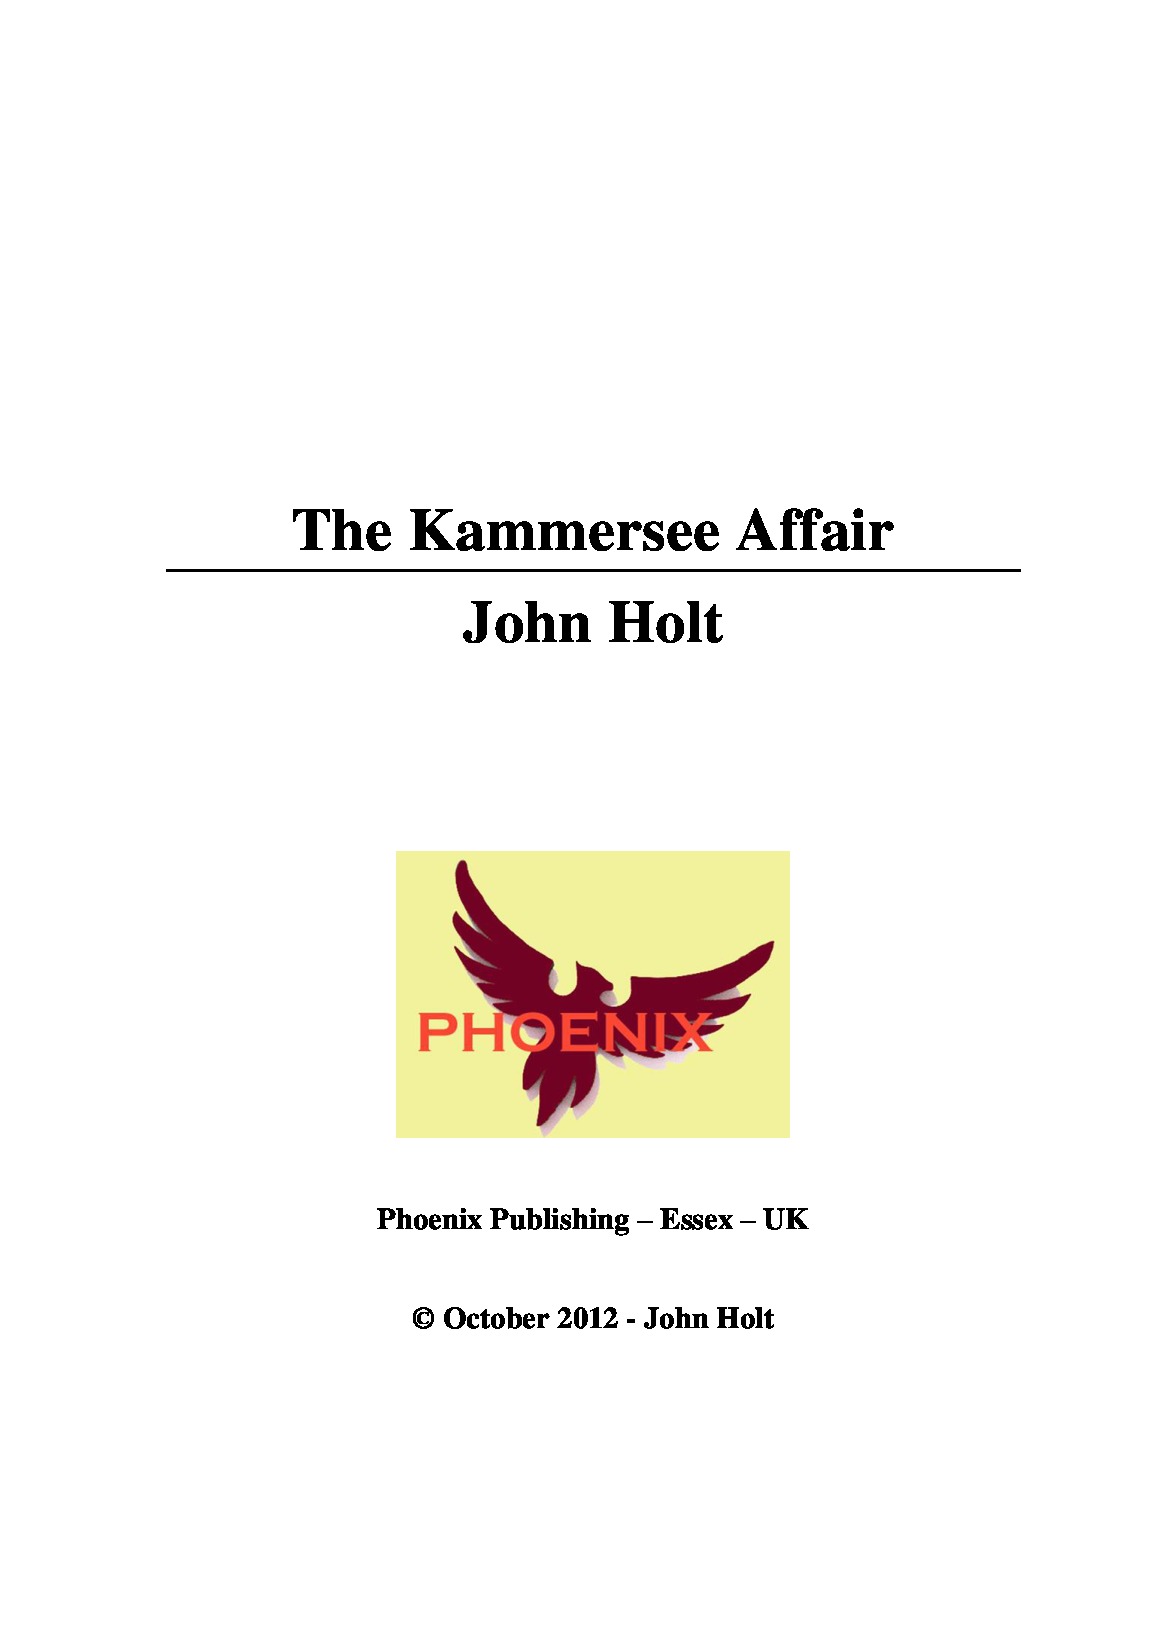 The Kammersee Affair by John Holt